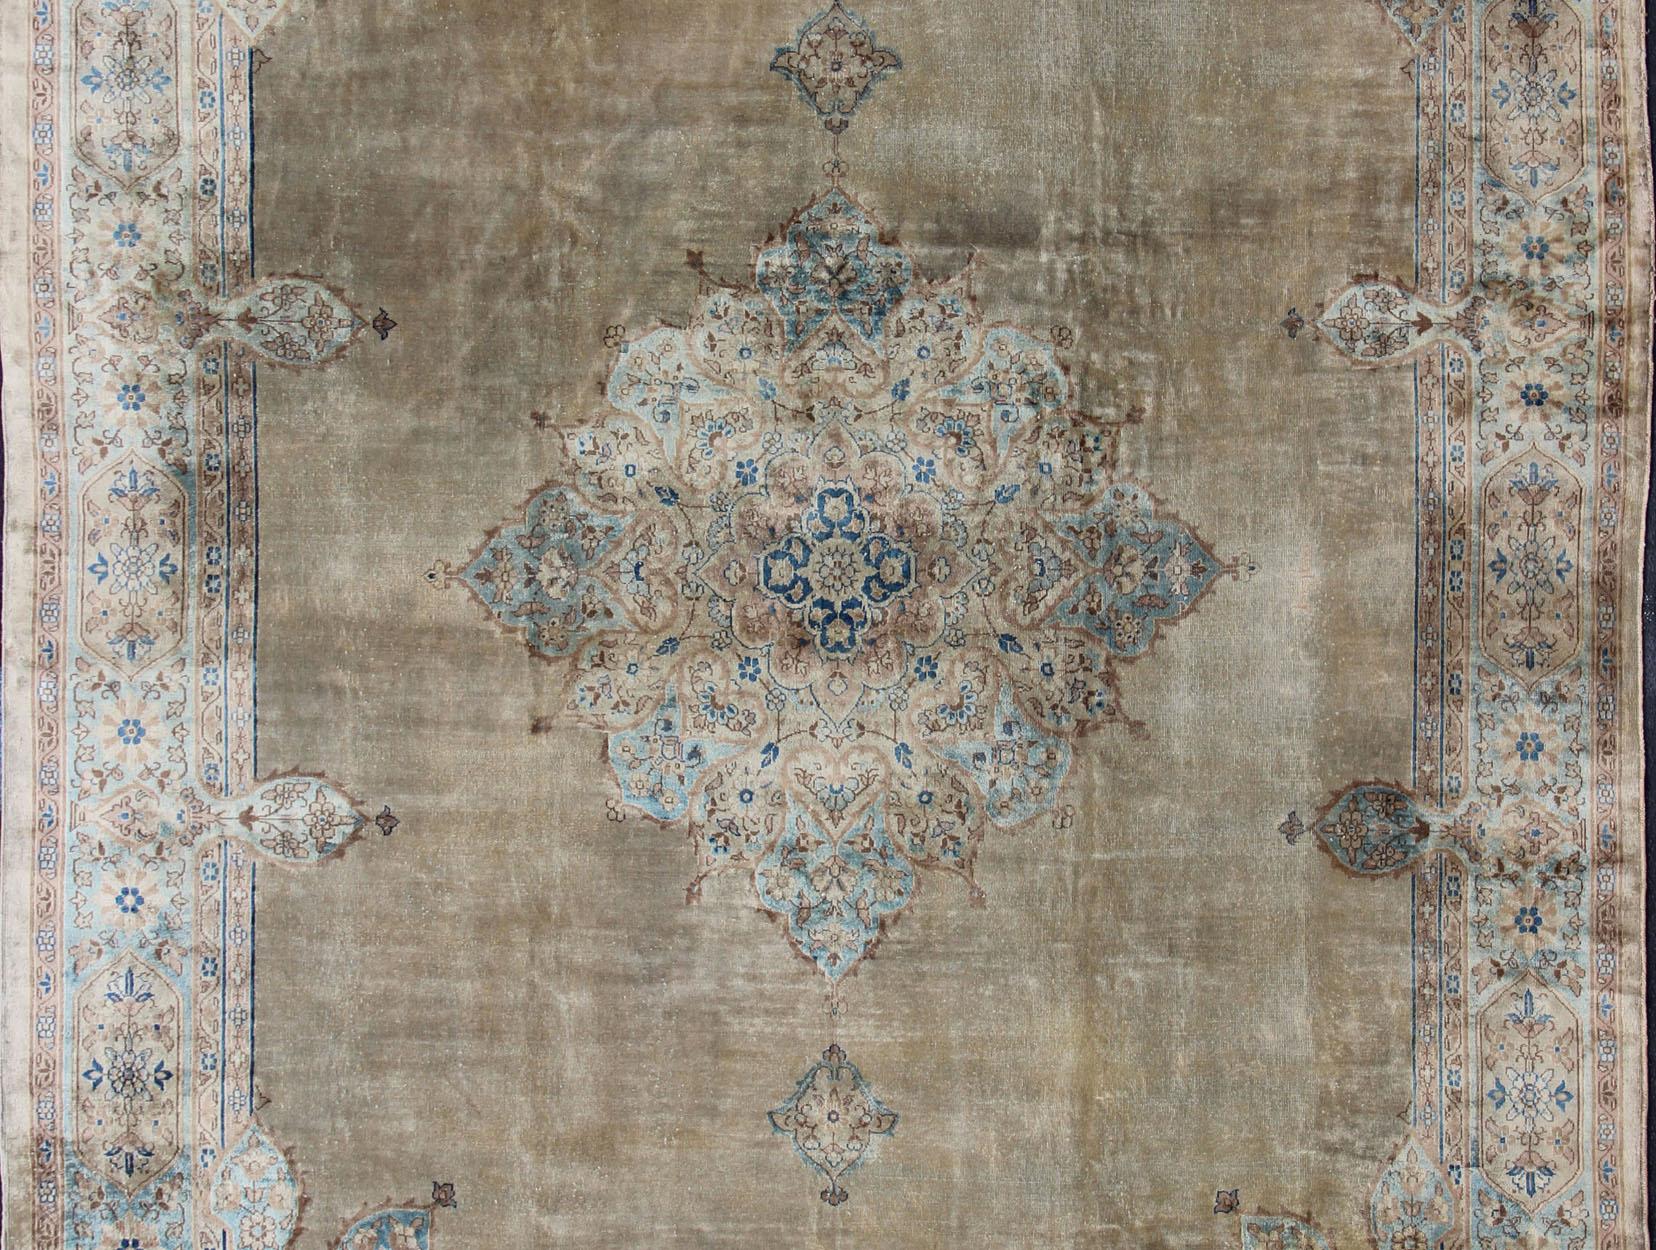 Indian Antique Hand Knotted Amritsar Carpet in Taupe, Light Brown and Blue Accent's